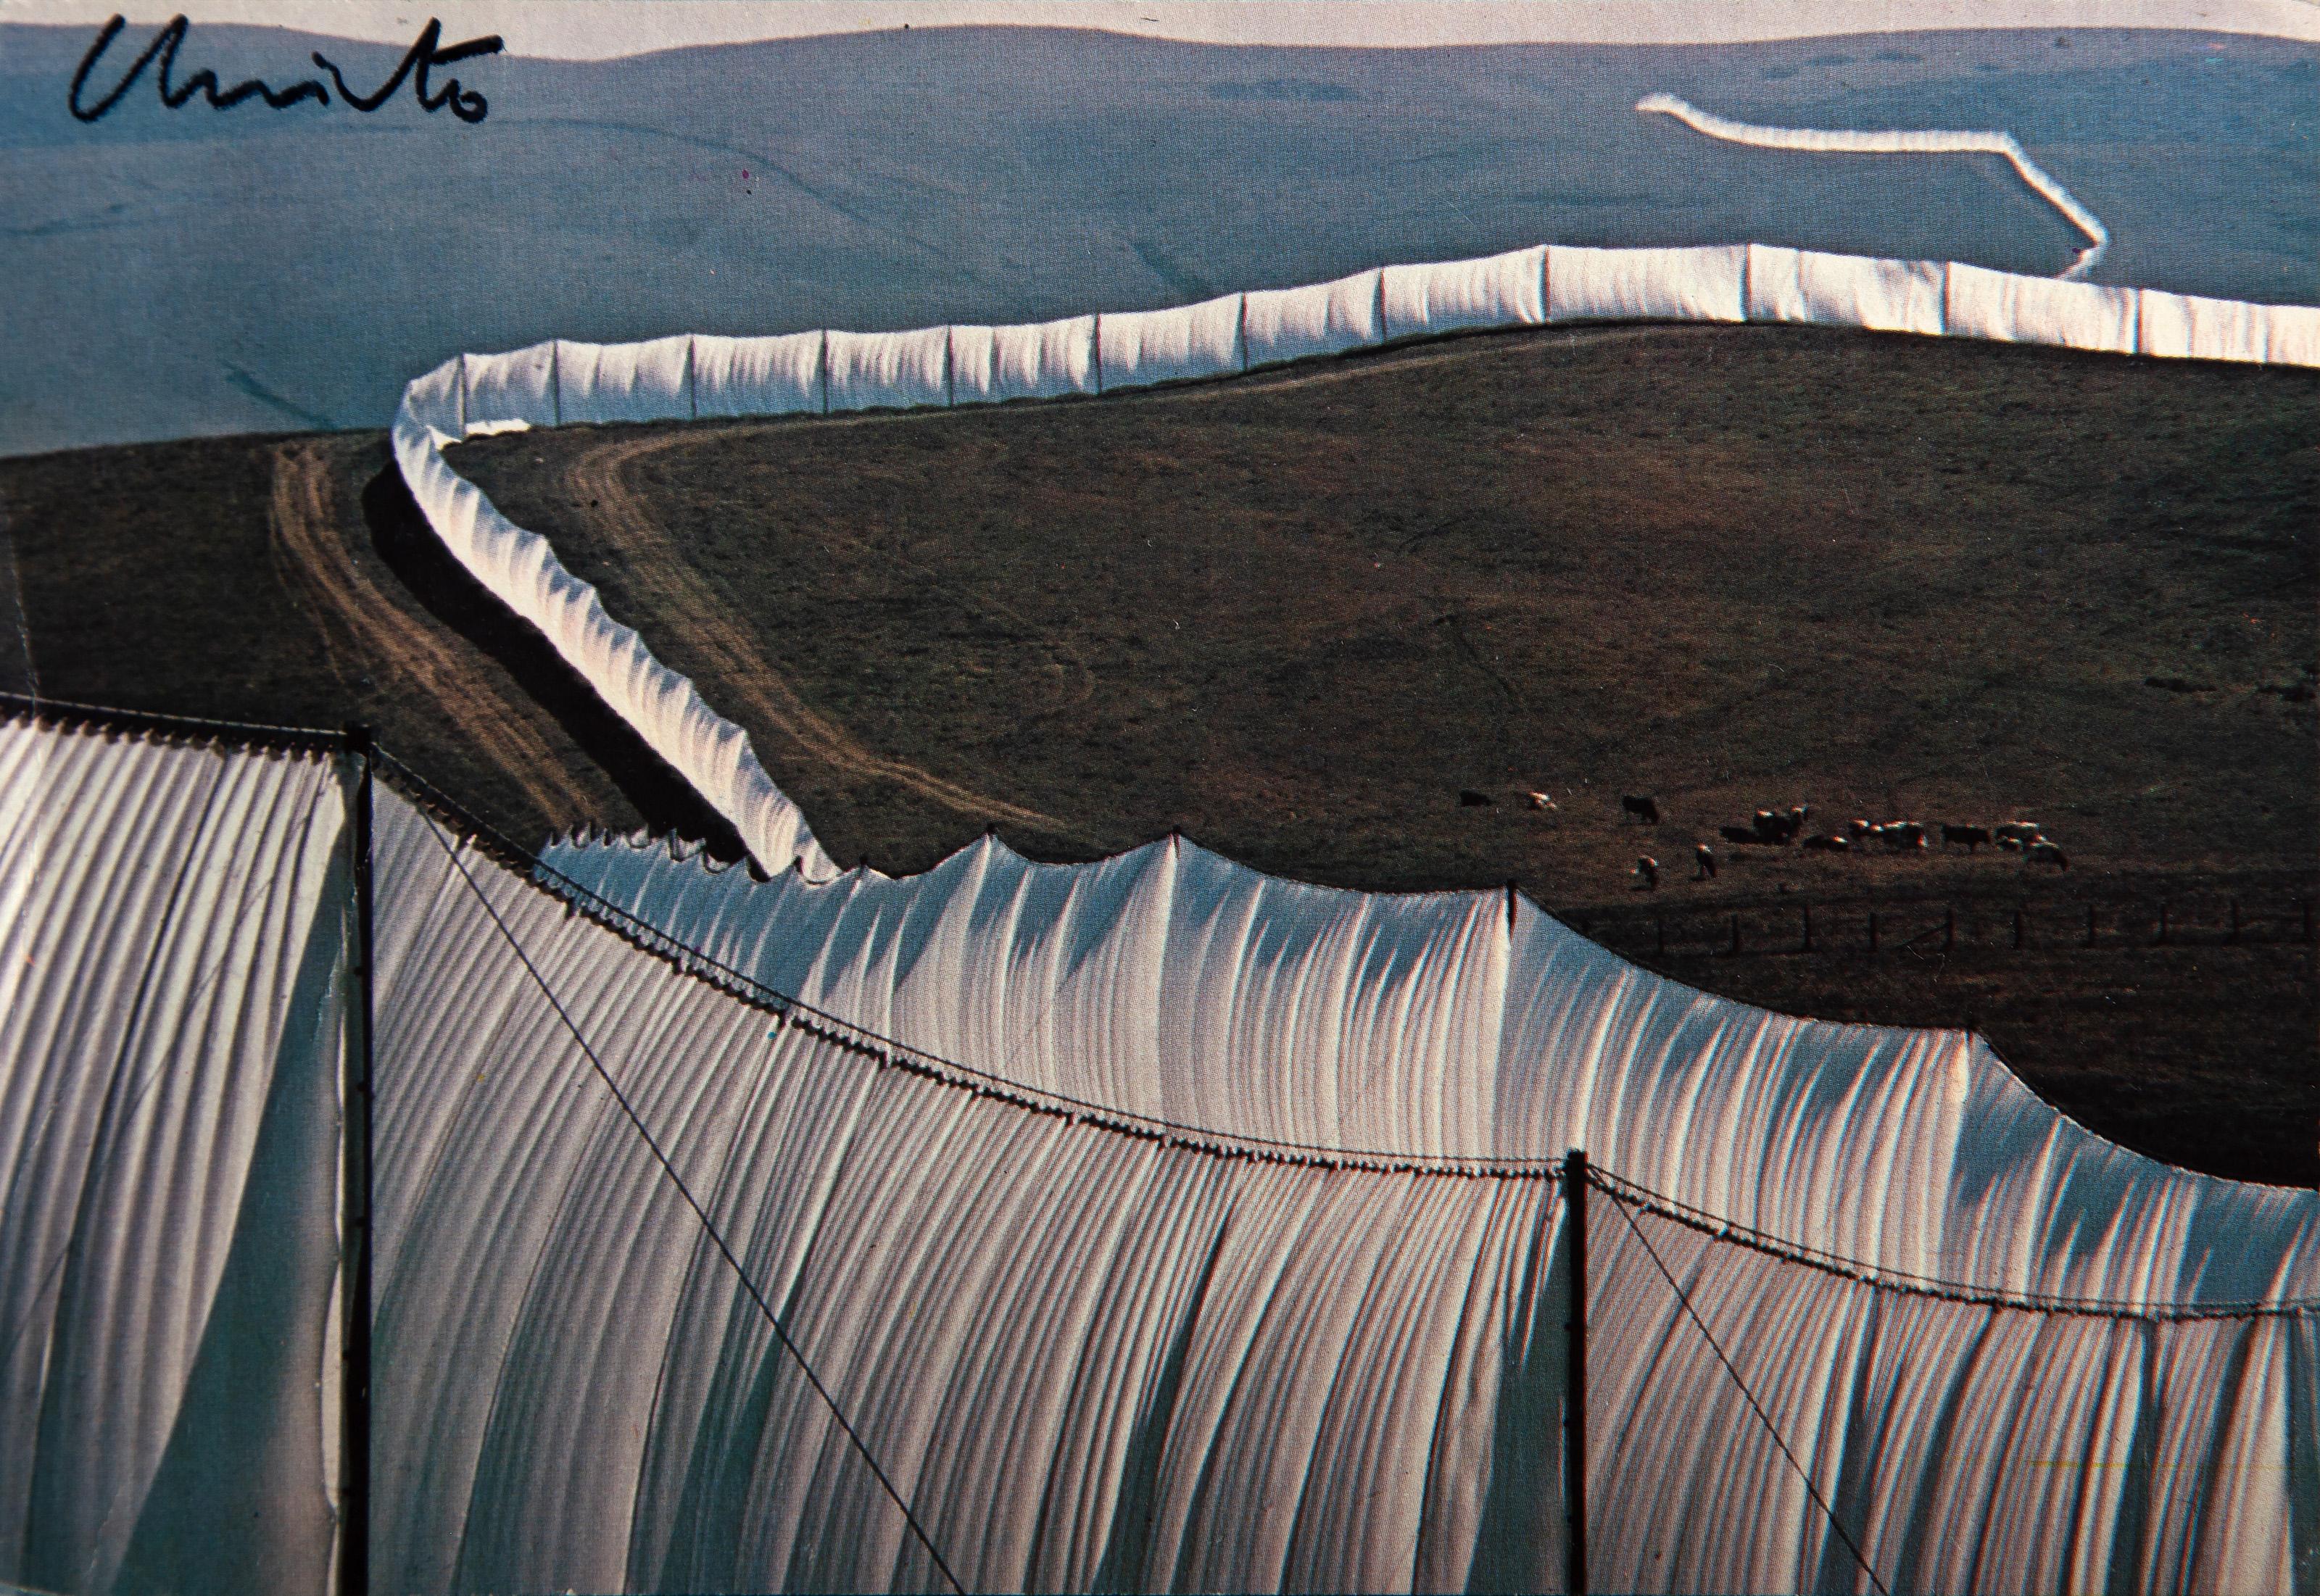  Christo and Jeanne-Claude, Bulgarian (1935 - 2020) - Running Fence Postcard, Medium: Postcard, signed in marker, Size: 4 x 6 in. (10.16 x 15.24 cm), Description: Image by Wolfgang Volz.